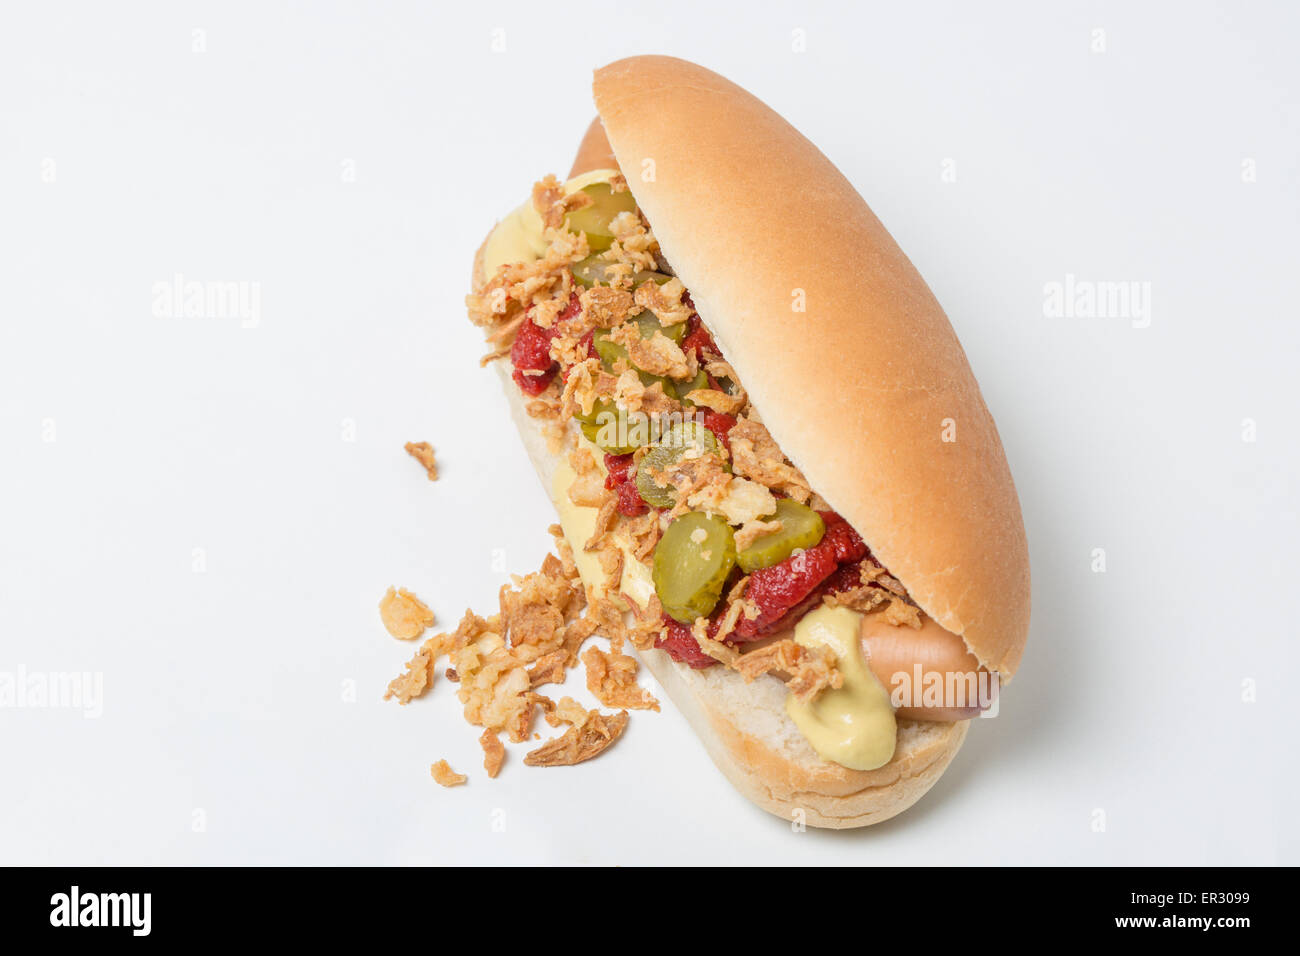 Hot Dog sausage in a bun with roasted onions, pickles, ketchup and mustard on white background Stock Photo